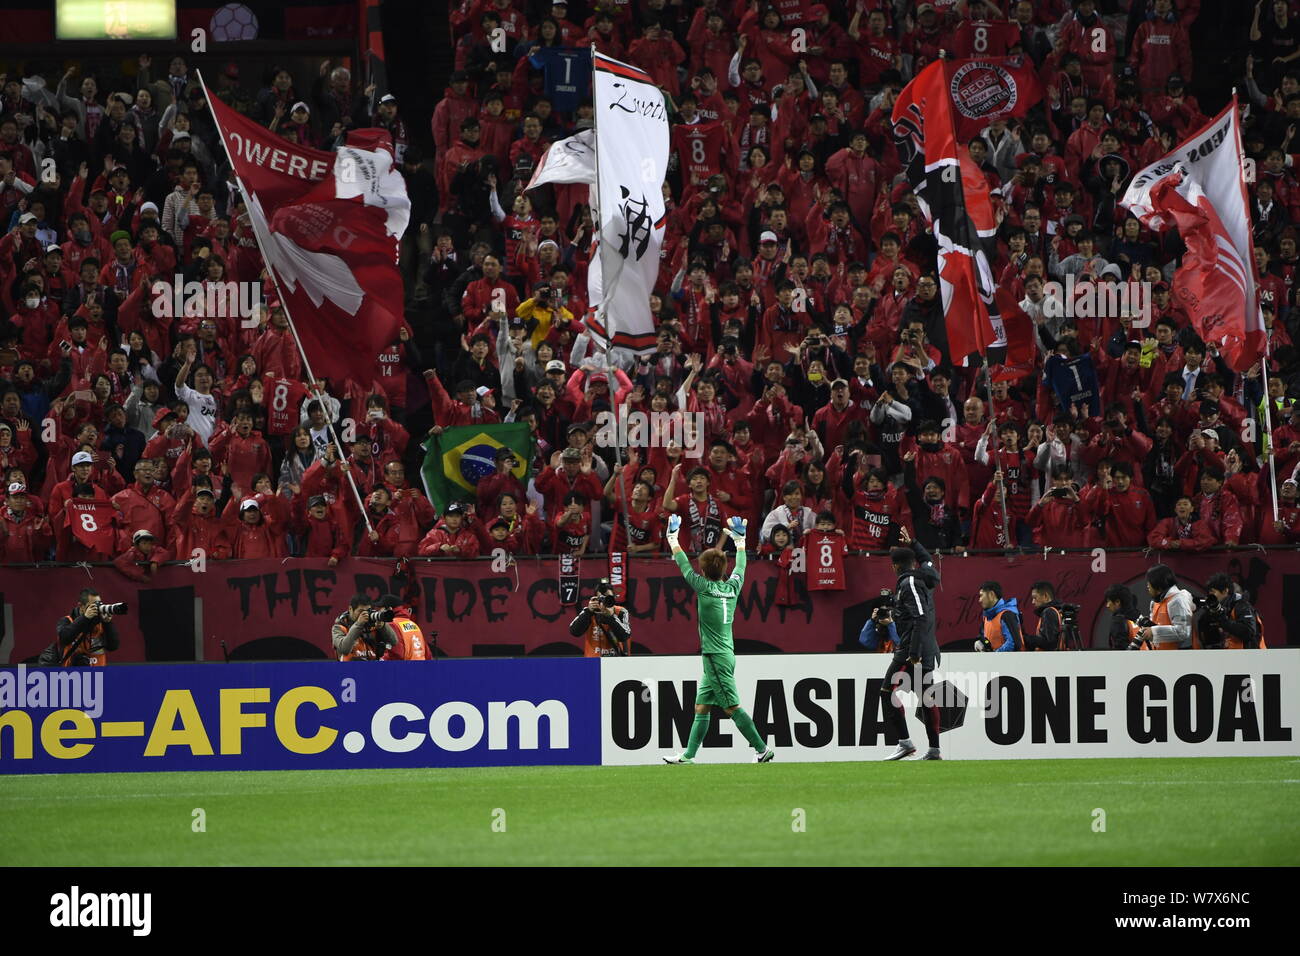 Shusaku Nishikawa of Japan's Urawa Red Diamonds waves to Japanese football fans after defeating China's Shanghai SIPG in their Group F match during th Stock Photo